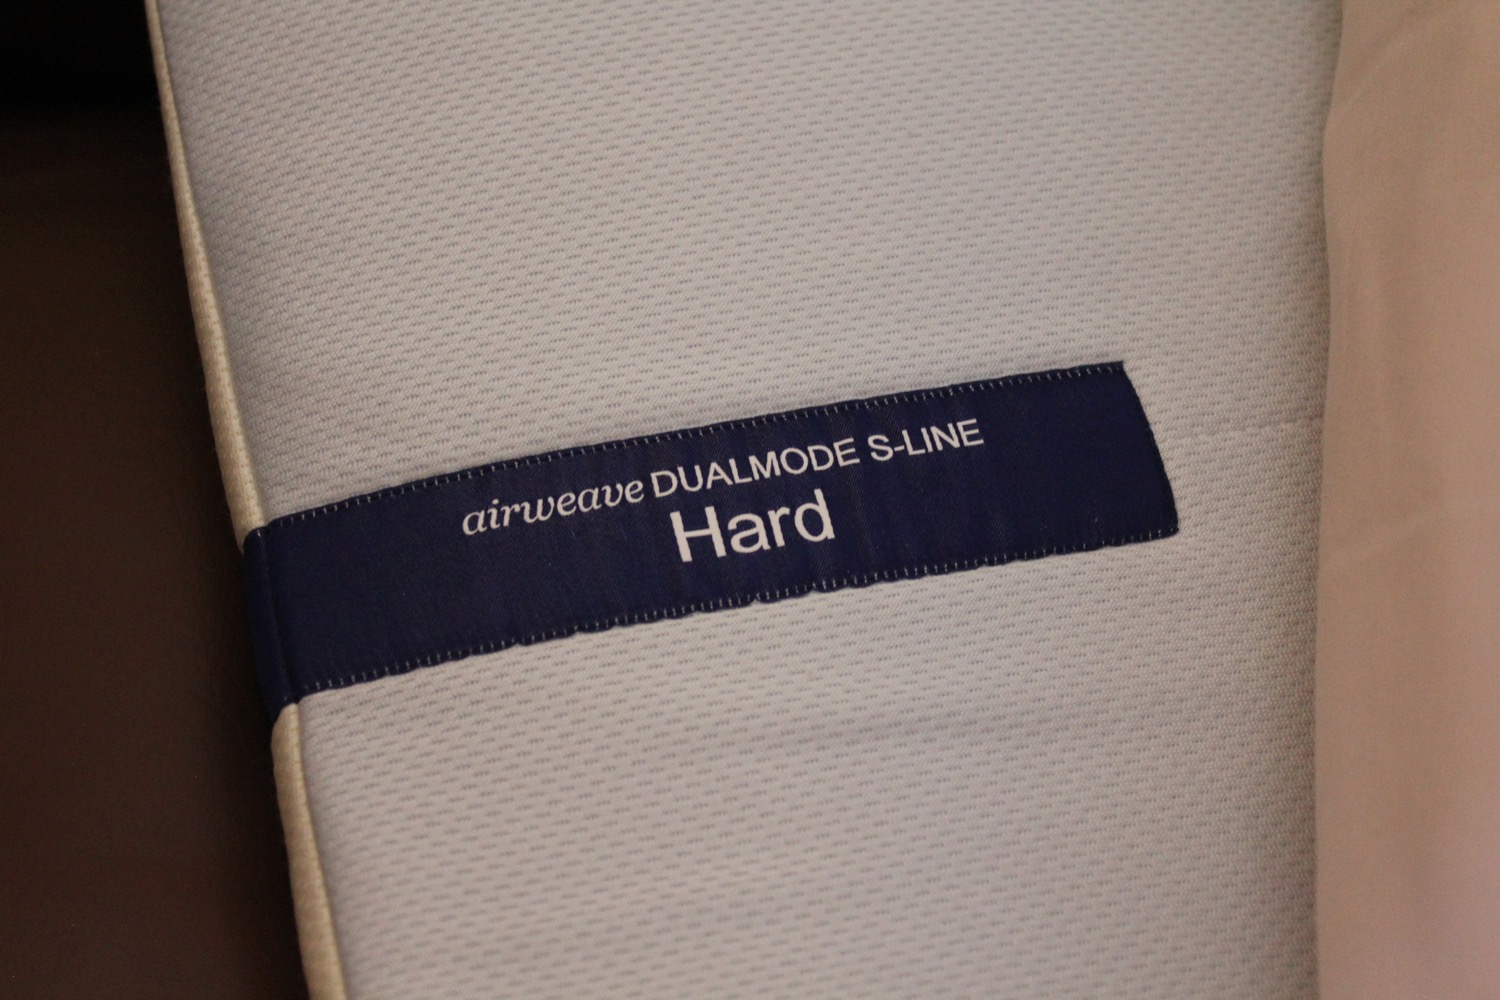 a label on a fabric surface